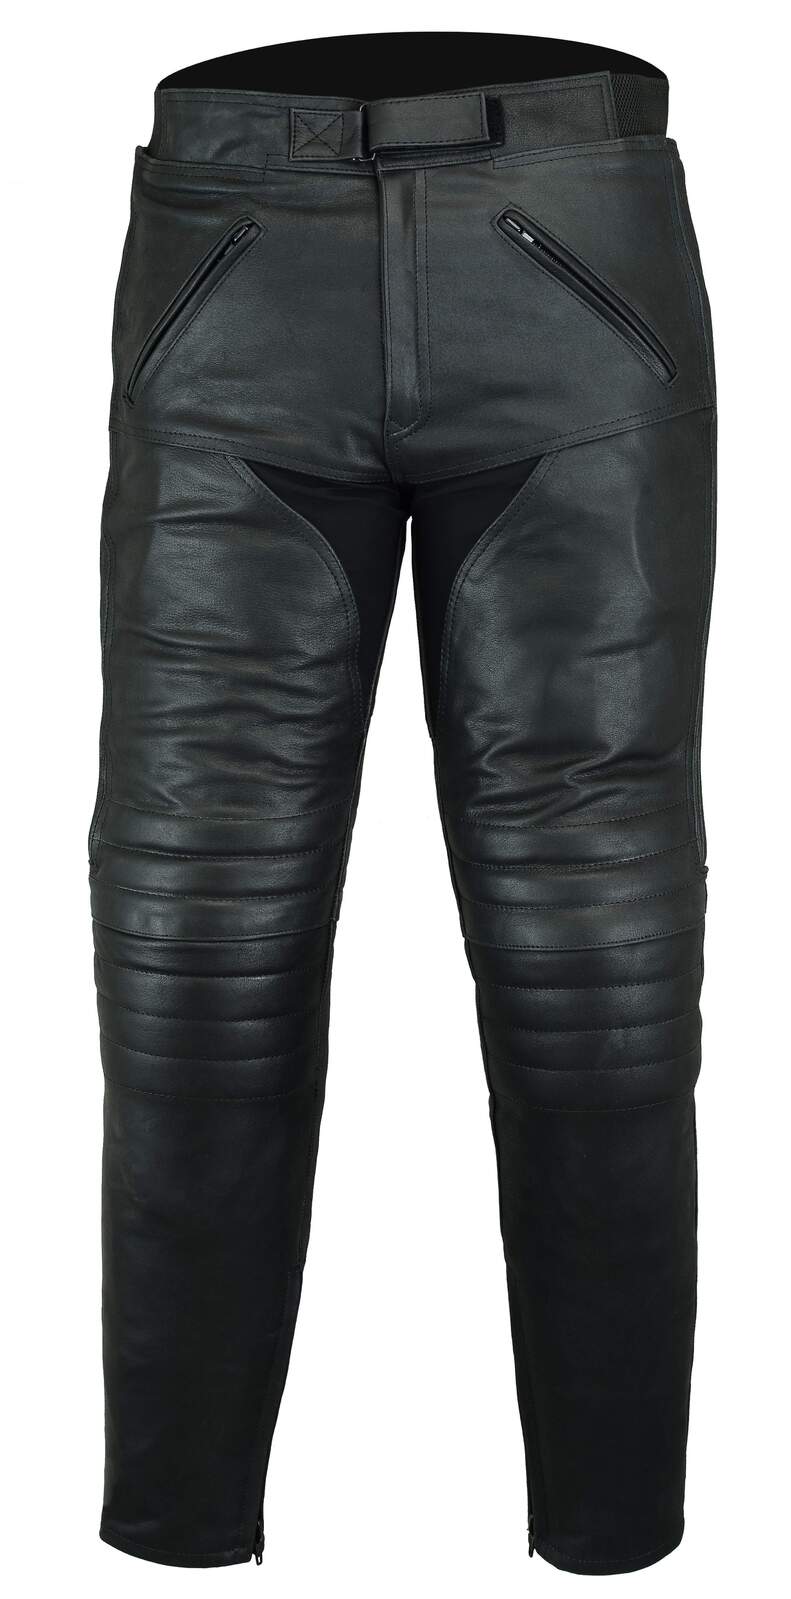 MENS MOTORCYCLE MOTORBIKE CRUISER STYLE TOURING SOFT LEATHER PANTS